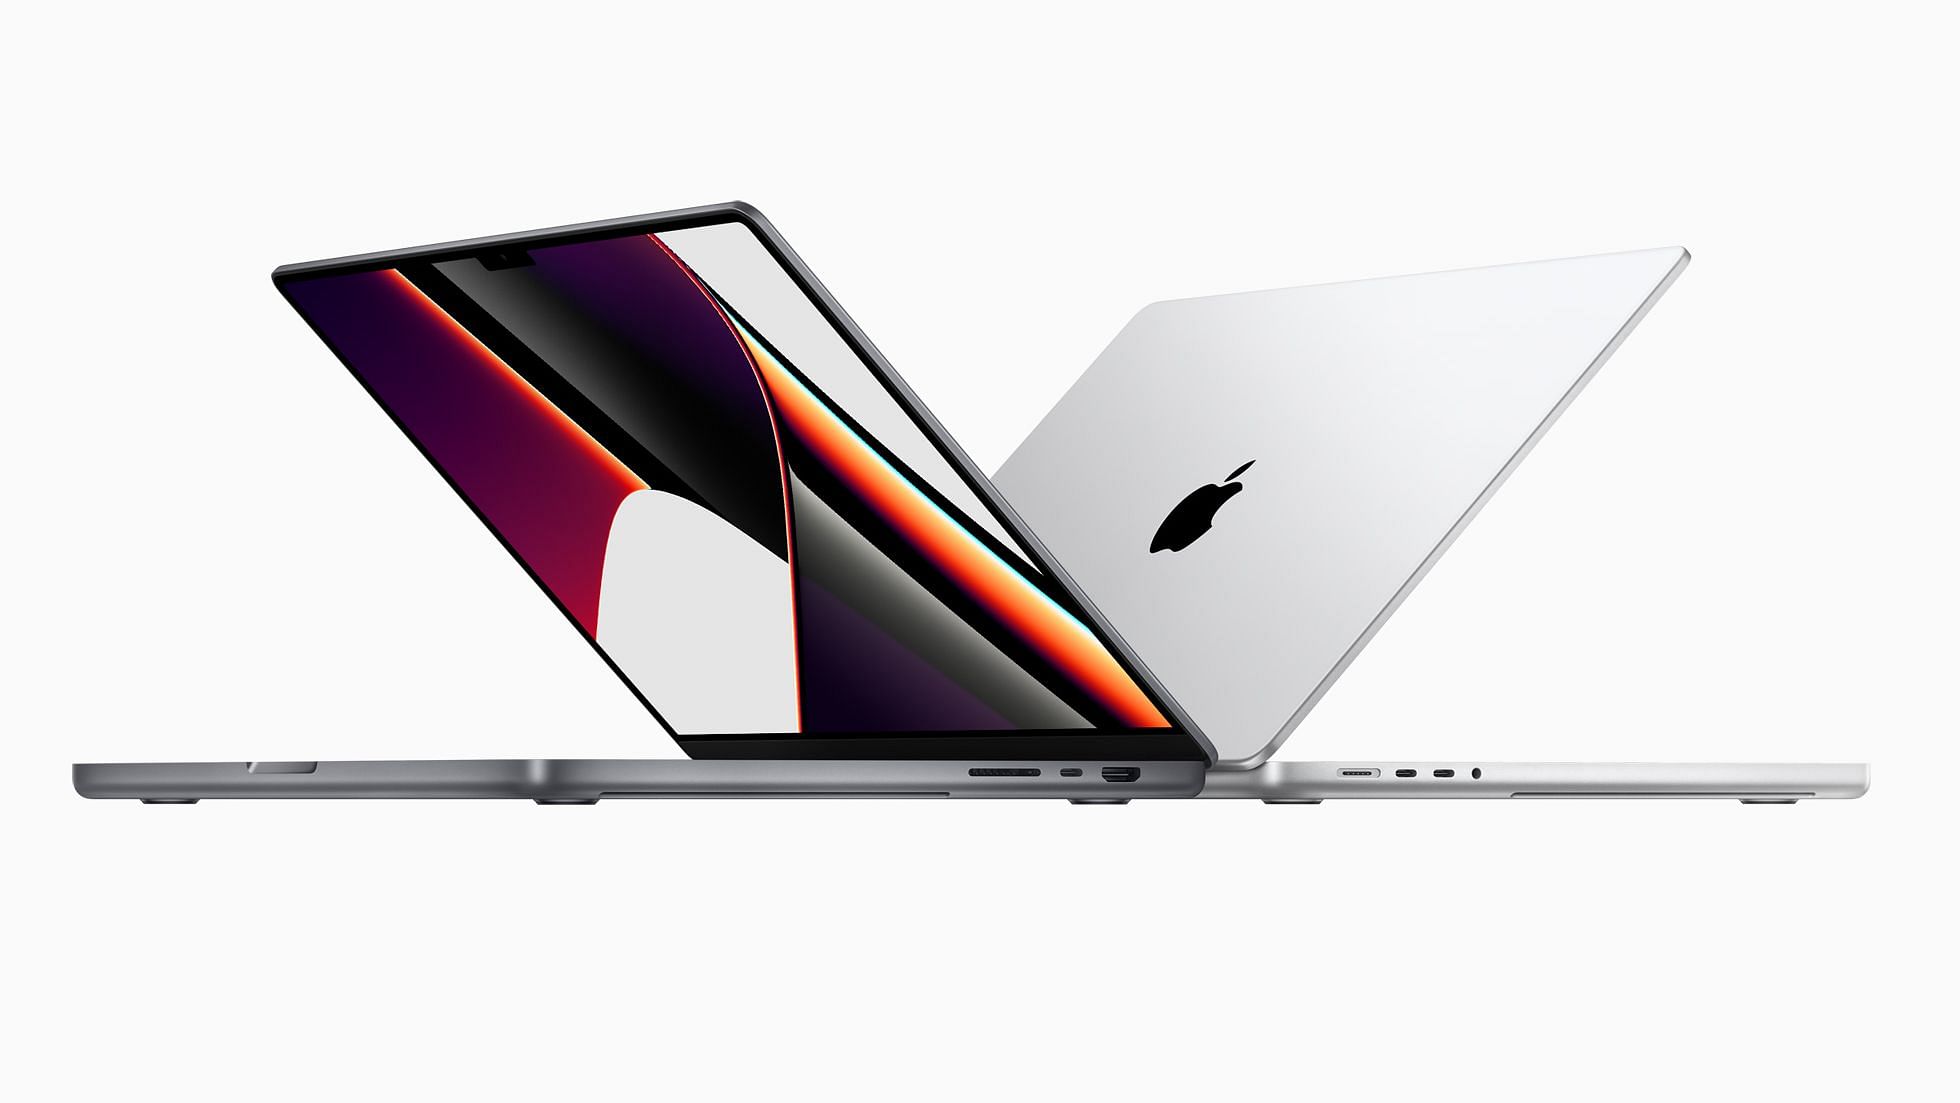 Apple 'Unleashed' MacBook Pros With M1 Pro & M1 Max Chips, AirPods 3